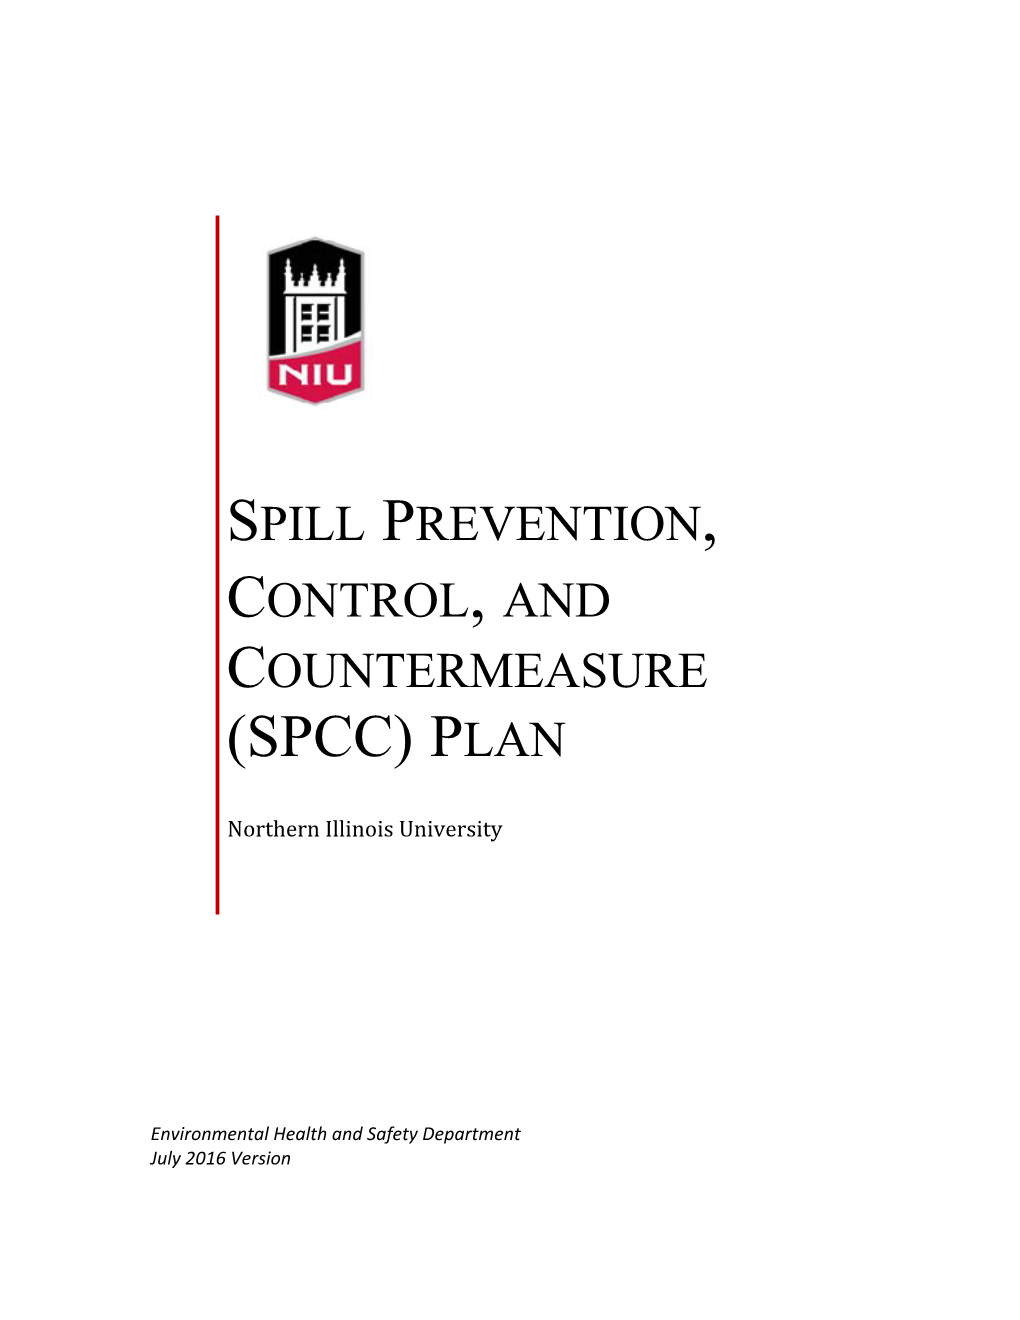 Spill Prevention, Control, and Countermeasure (Spcc) Plan